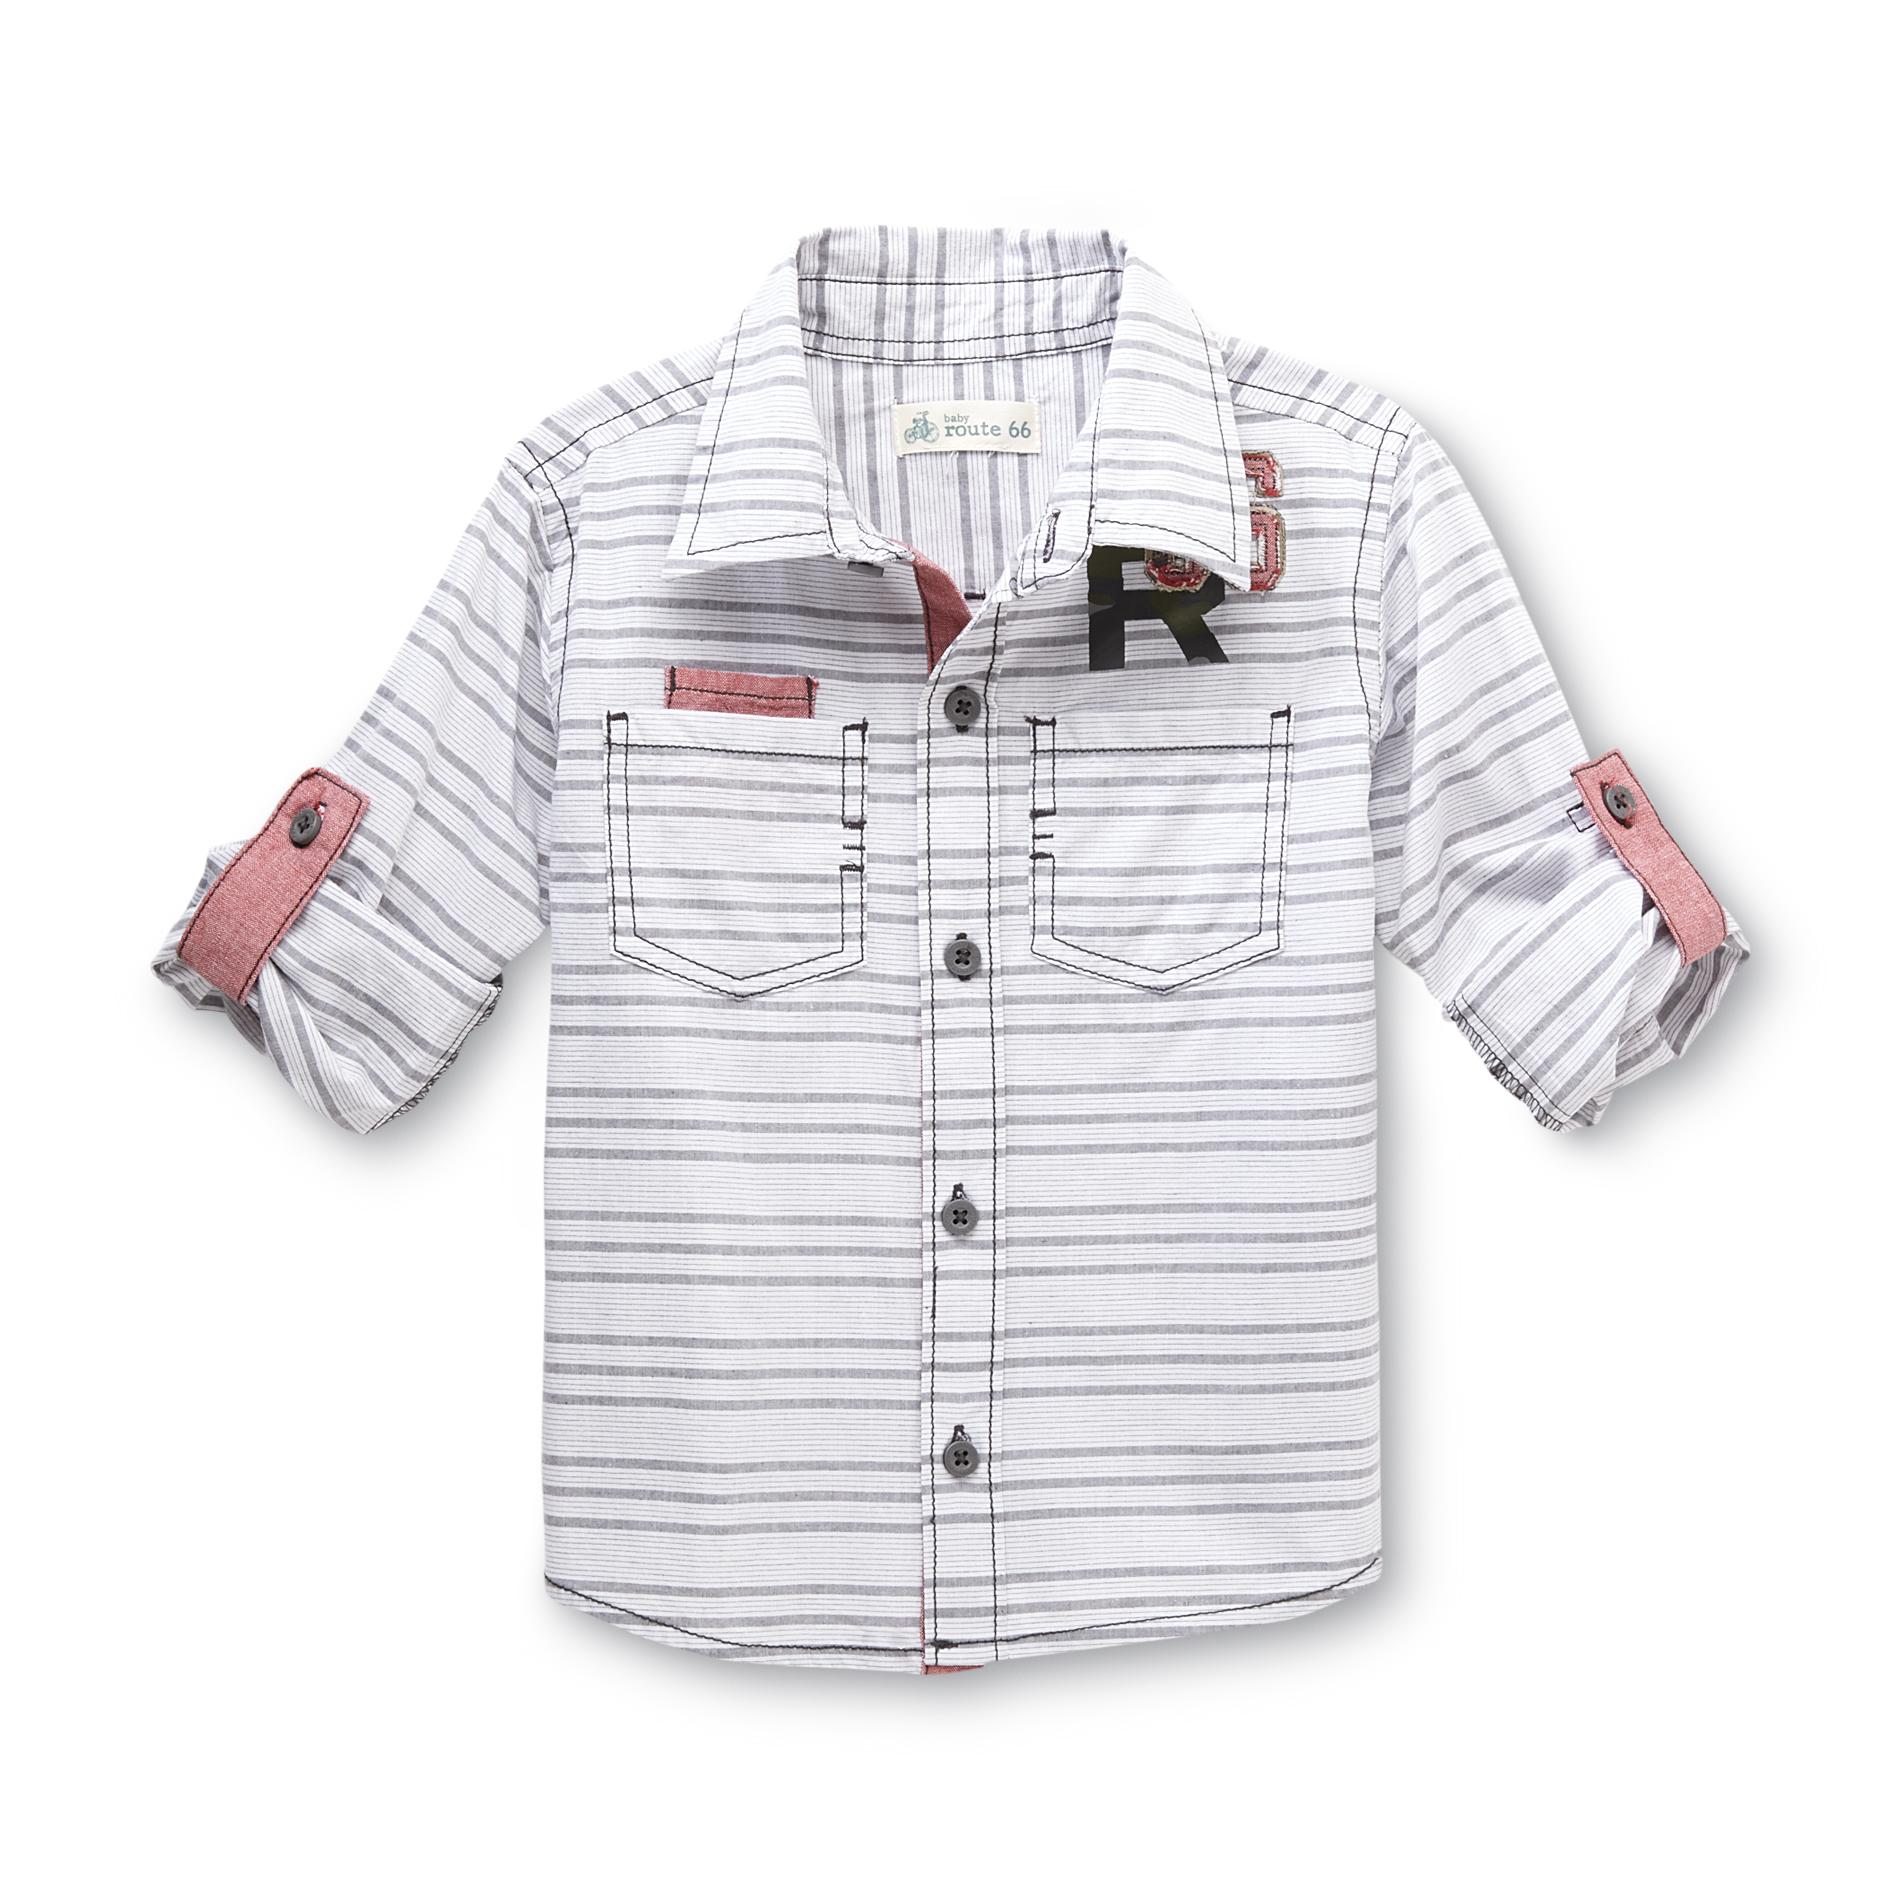 Route 66 Toddler Boy's Long-Sleeve Shirt - Striped